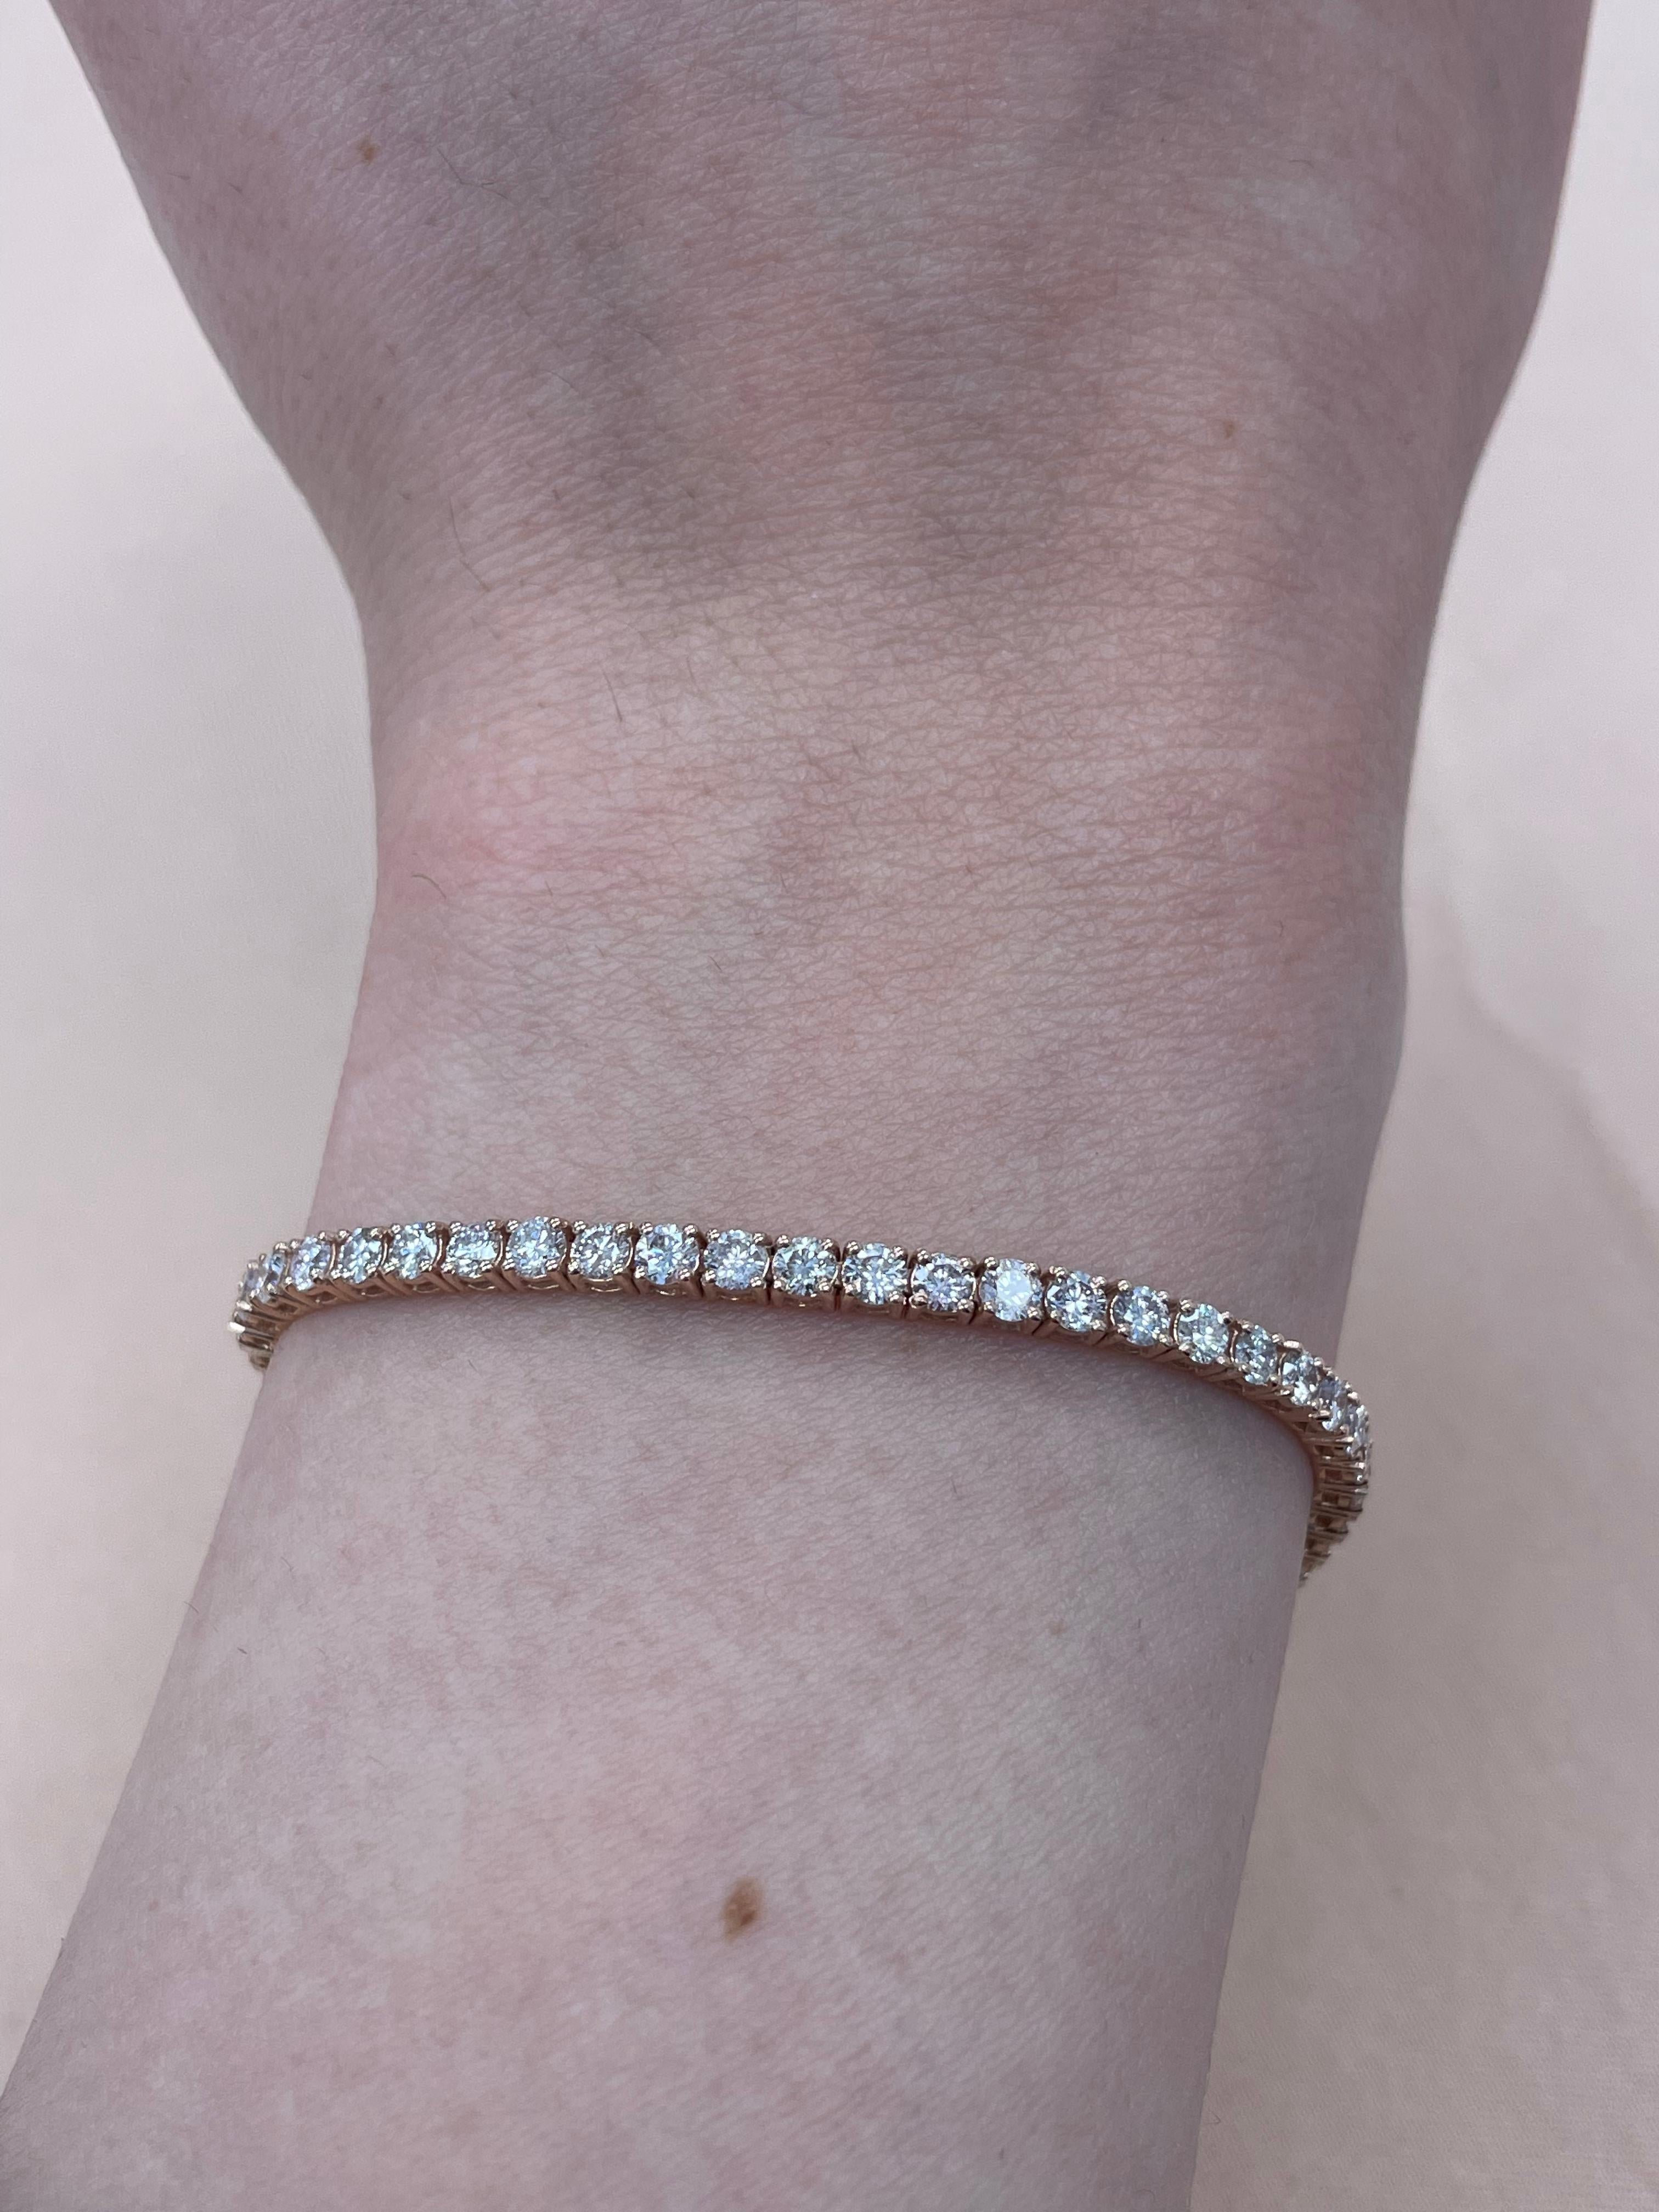 Exquisite and timeless diamonds tennis bracelet, by Alexander Beverly Hills.
63 round brilliant diamonds, 4.31 carats total. Approximately Very Light Pink color (looks like regular white diamonds in mounting) and VS2/SI1 clarity. Four prong set in